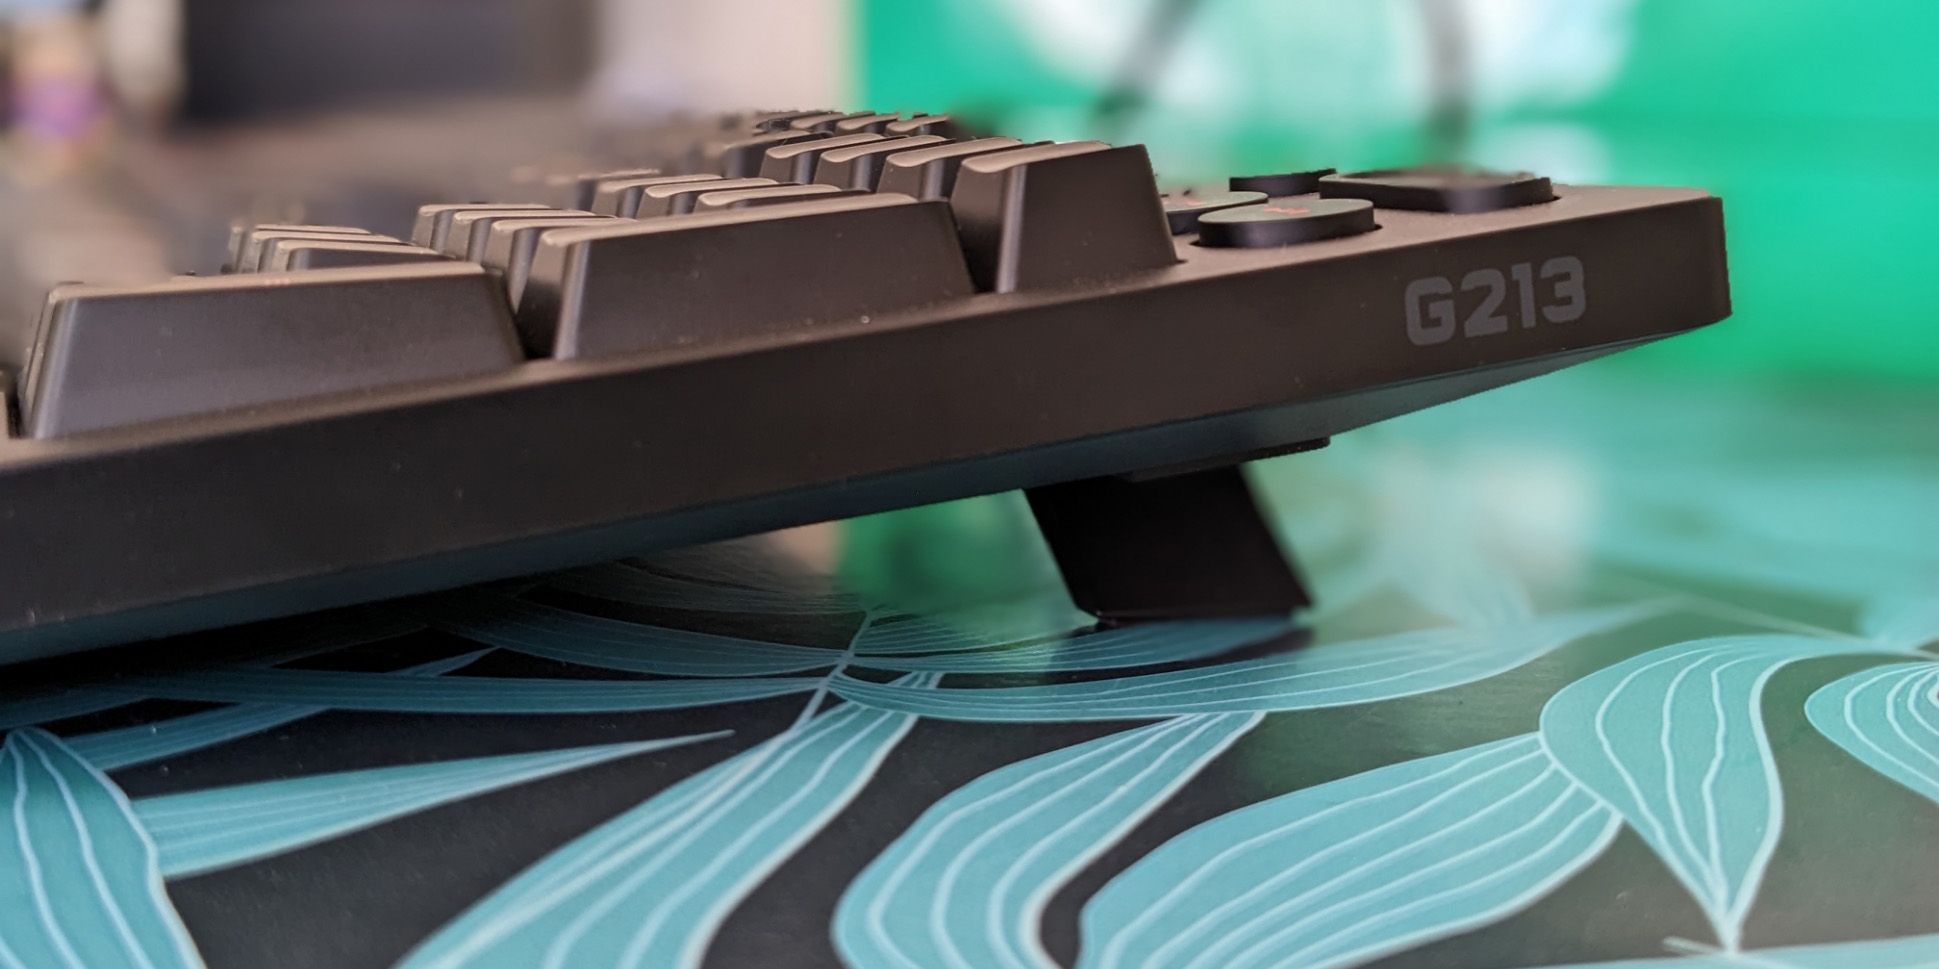 Logitech G213 Gaming Keyboard Close up from the side